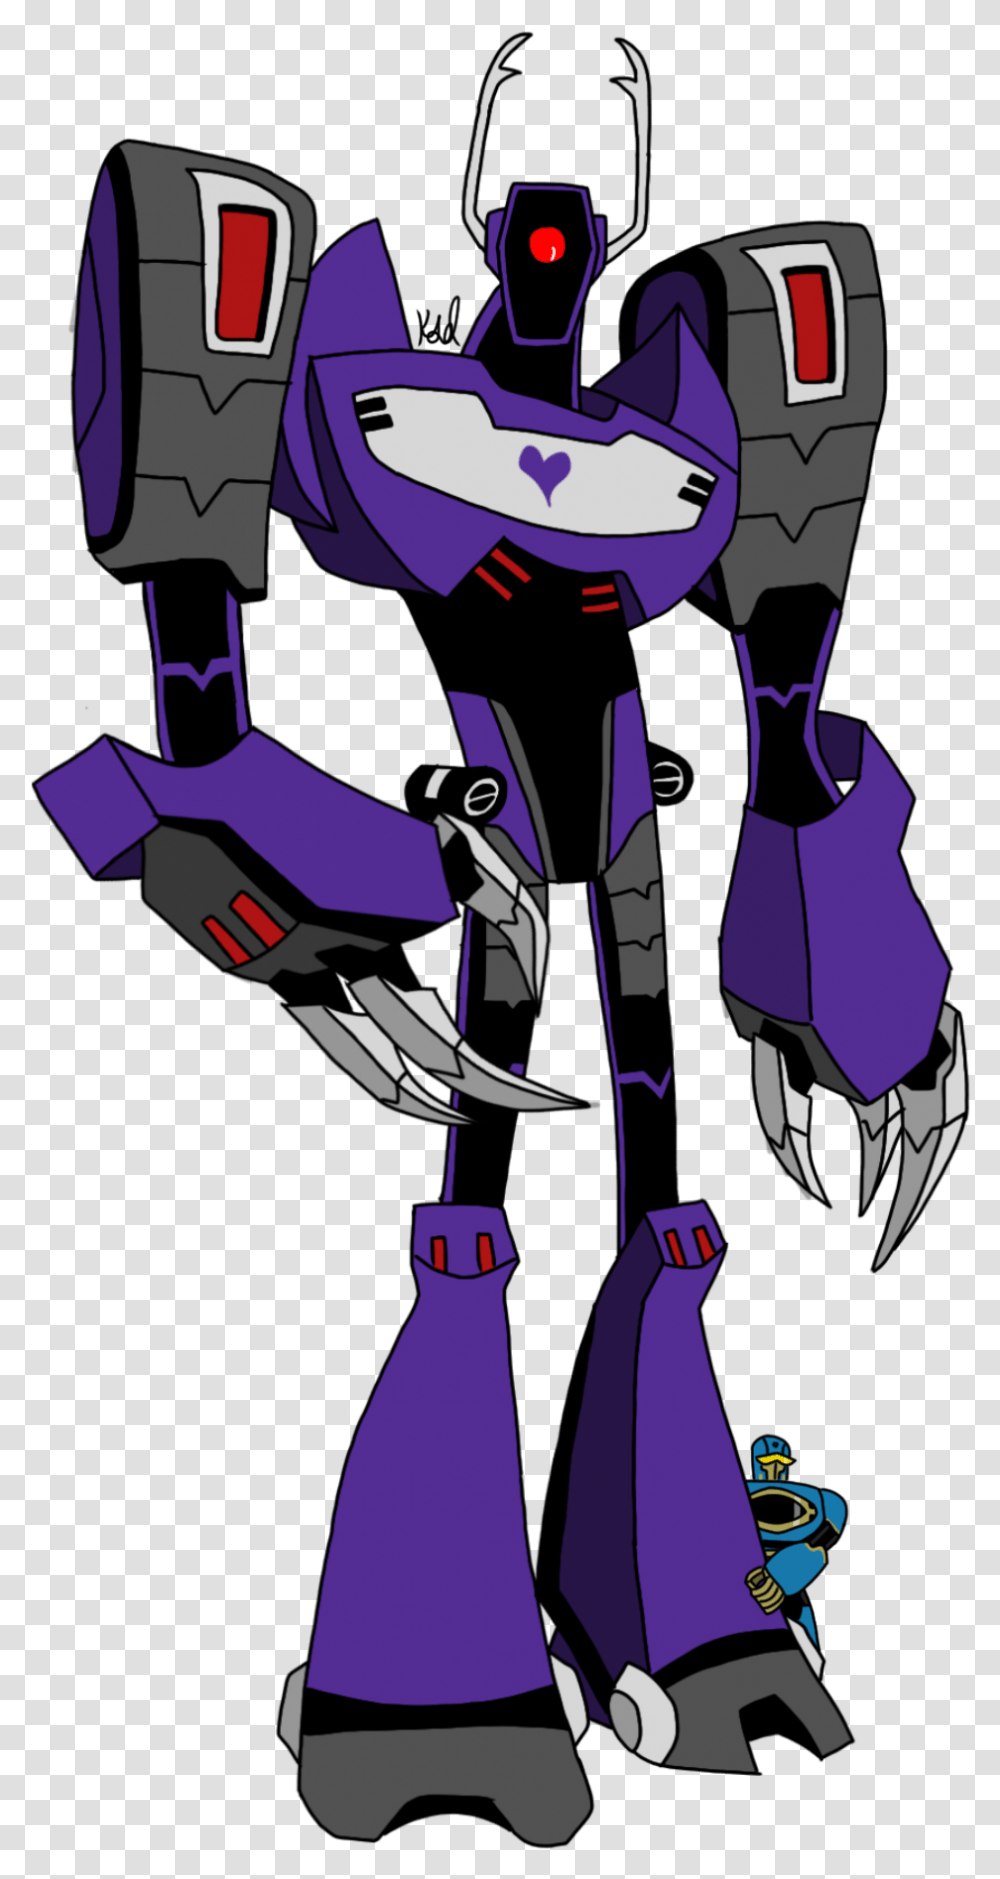 Download Tfa Shockwave And Small Friend Cartoon Hd Transformers Animated Shockwave, Clothing, Comics, Book, Person Transparent Png